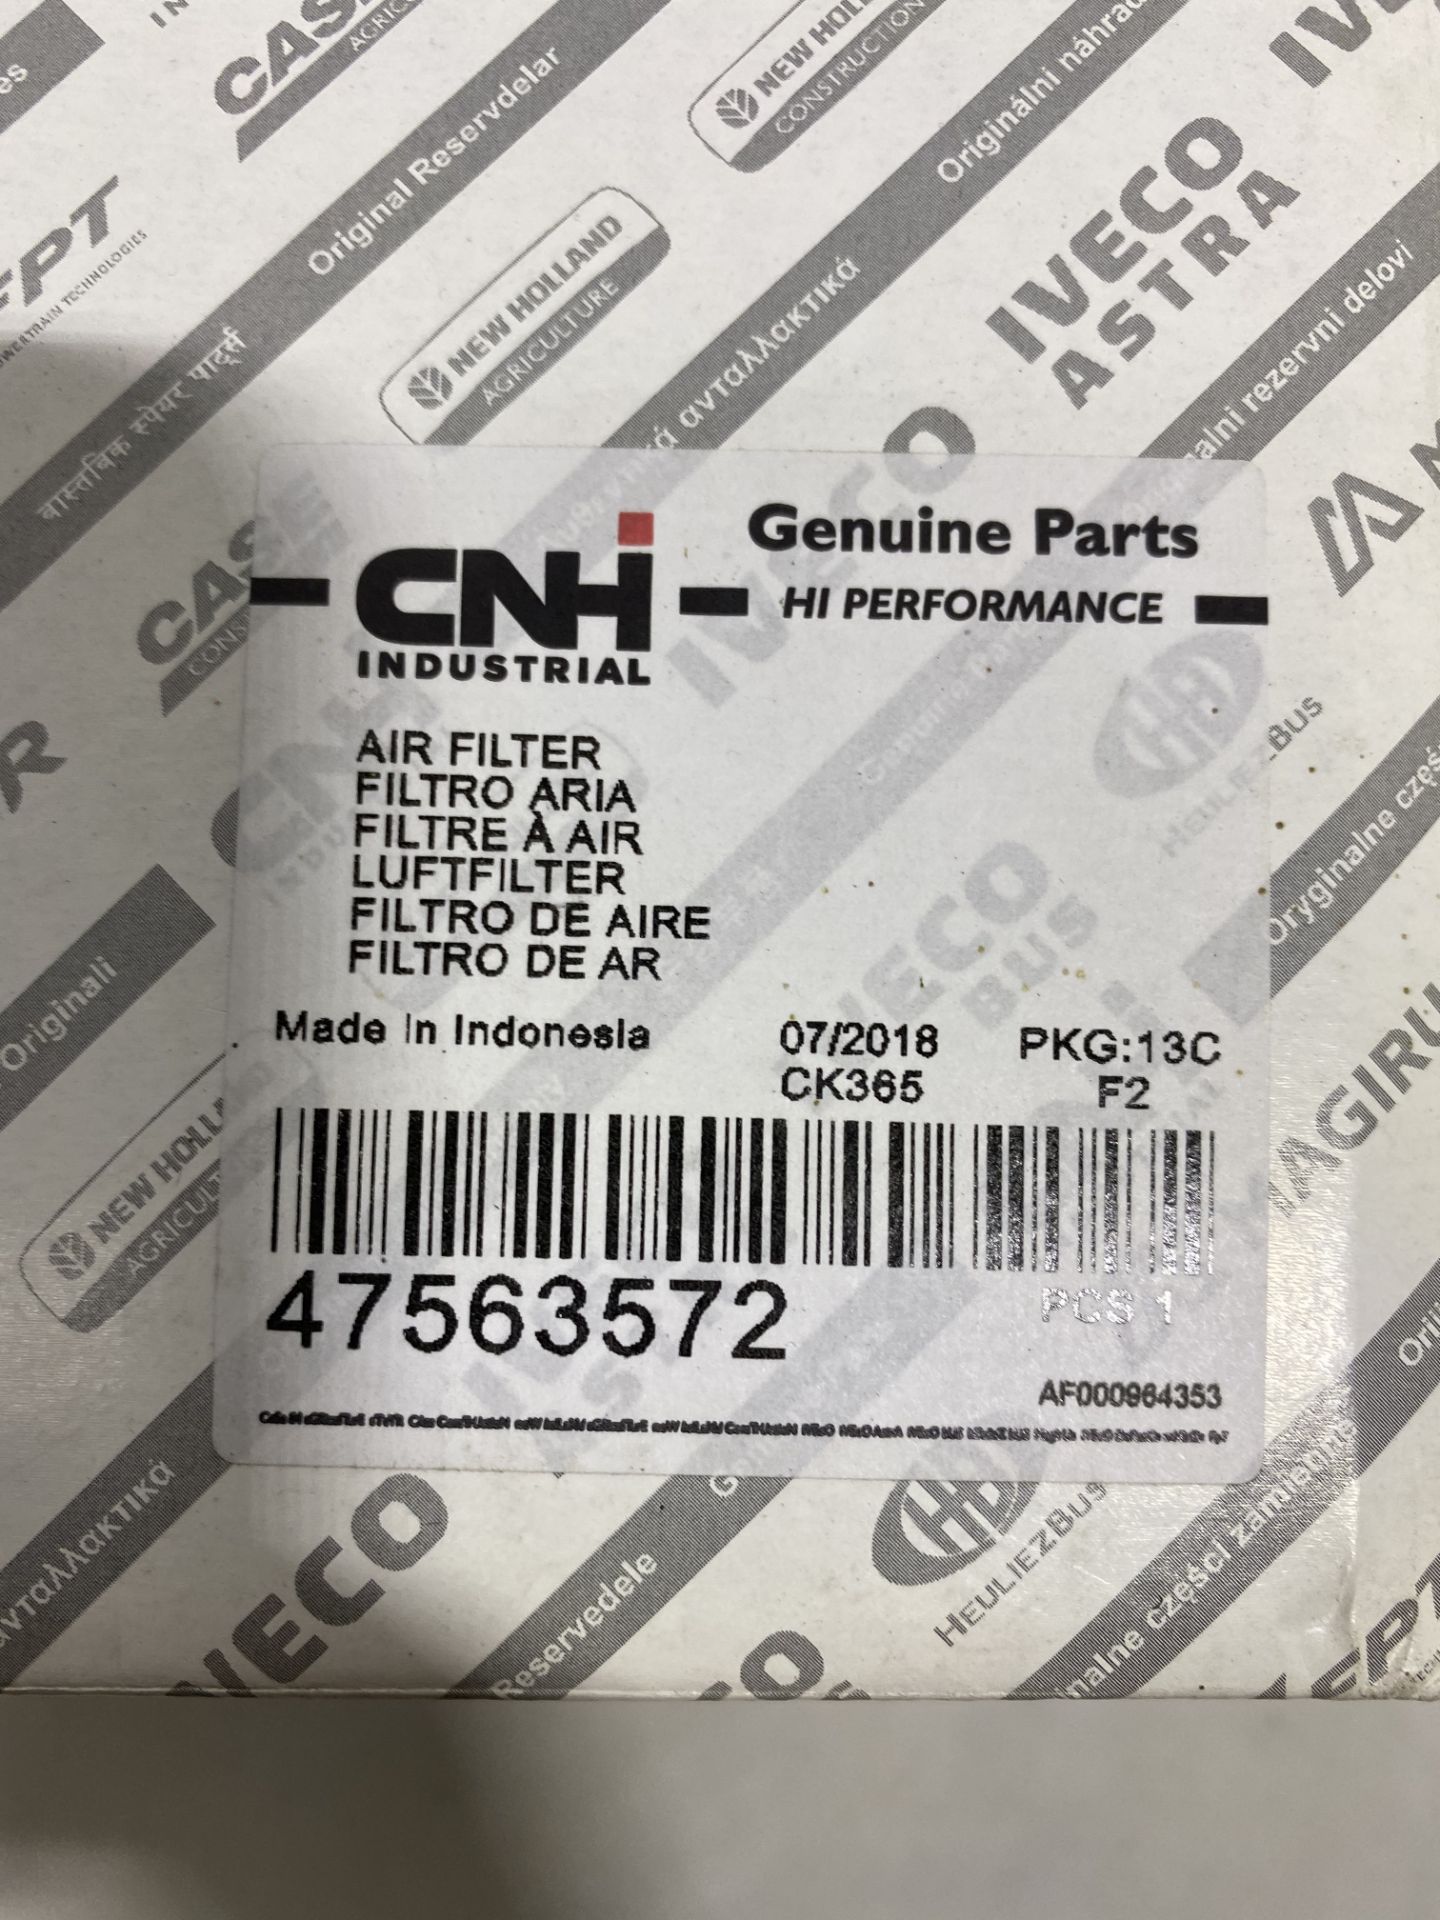 CNH Air Filter - Image 5 of 5